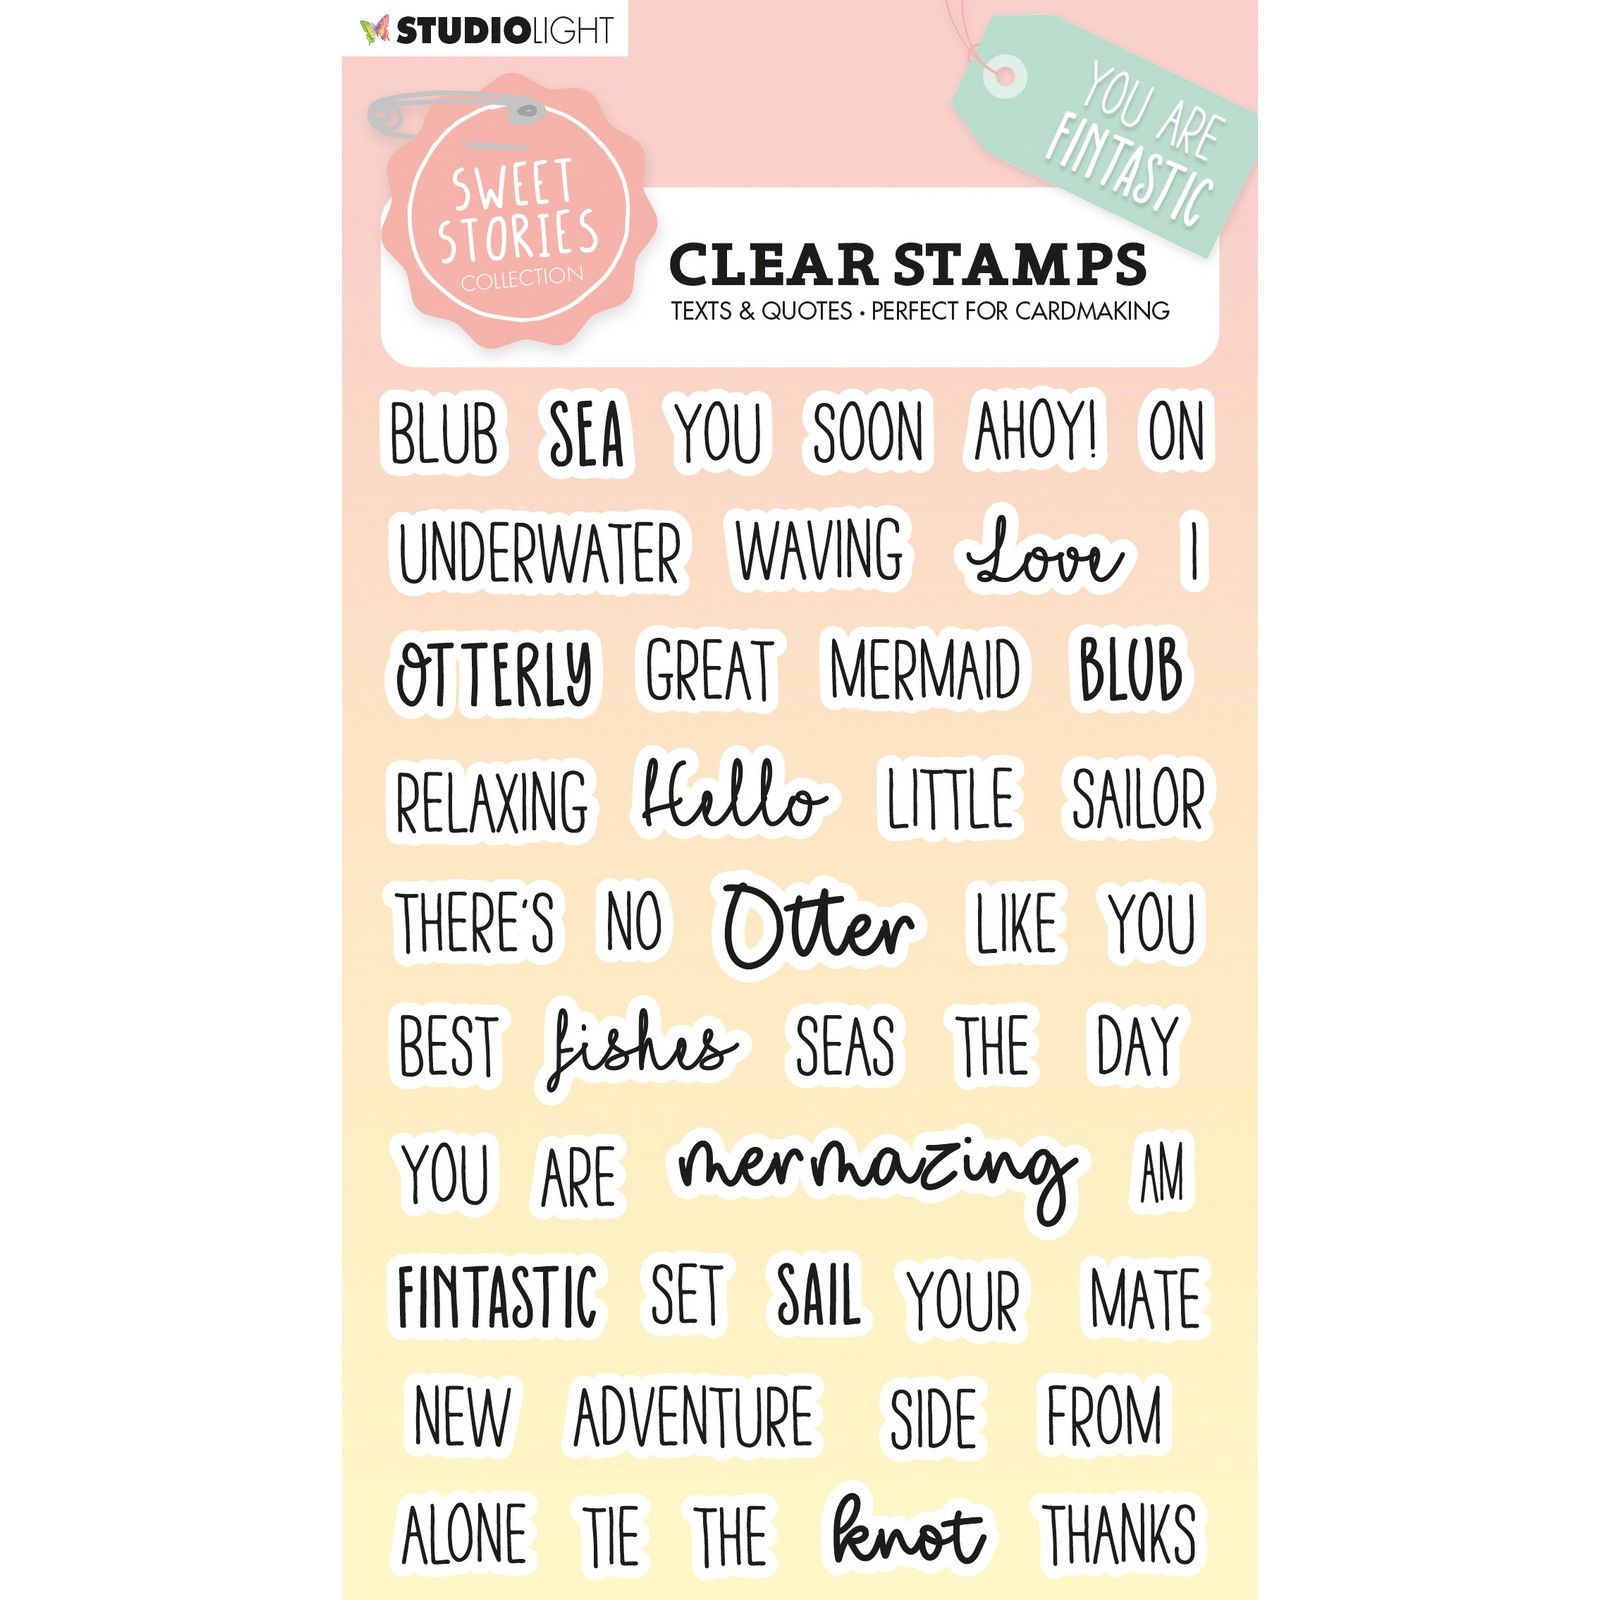 Studio Light • Sweet Stories Clear Stamp Quotes Small Fintastic